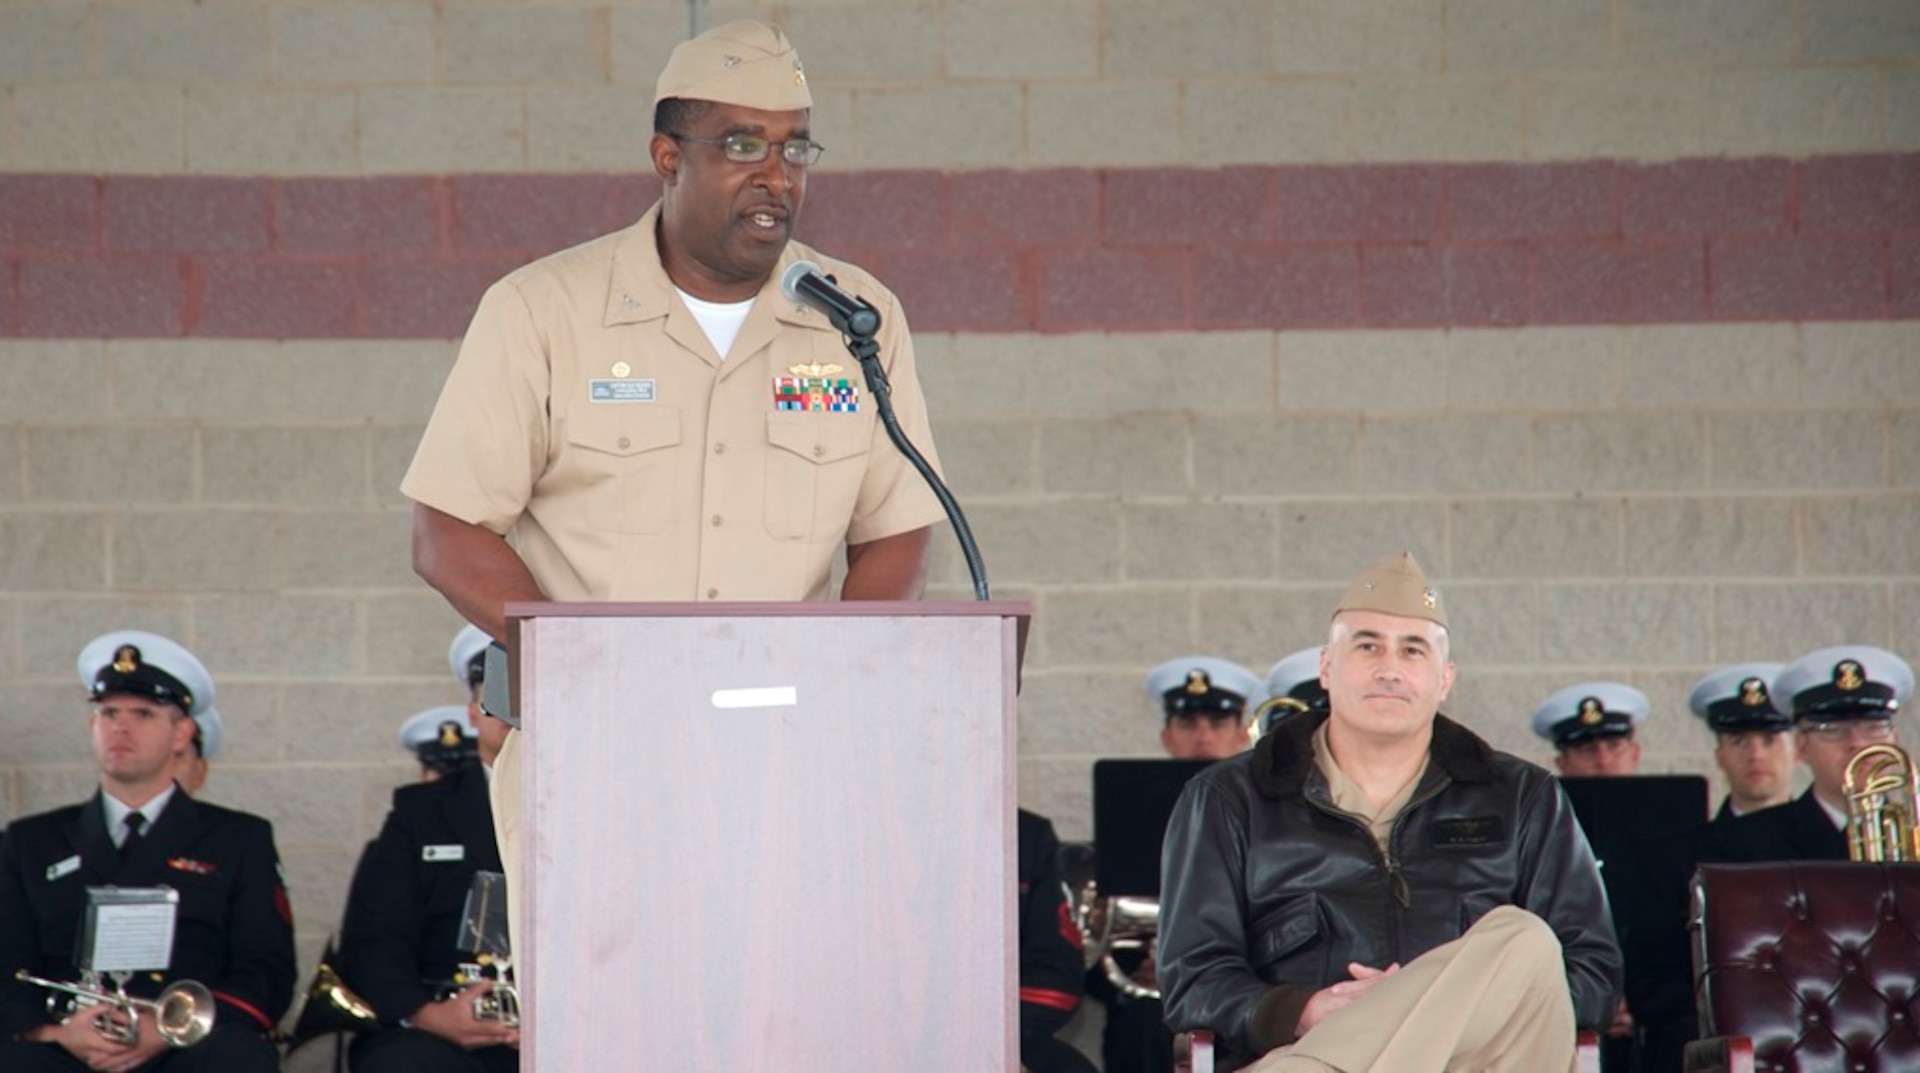 IMAGE: DAHLGREN, Va. (Oct. 16, 2017) – Naval Surface Warfare Center Dahlgren Division Commanding Officer Capt. Godfrey ‘Gus’ Weekes recounts the highlights of Dahlgren’s history before the military and civilian audience gathered to celebrate the centennial of the Navy base at Dahlgren. “The future of Dahlgren could not be brighter,” said Weekes, after reflecting on the technological impact Dahlgren has made to the Navy and nation. “I look forward to all that we can achieve going forward.”